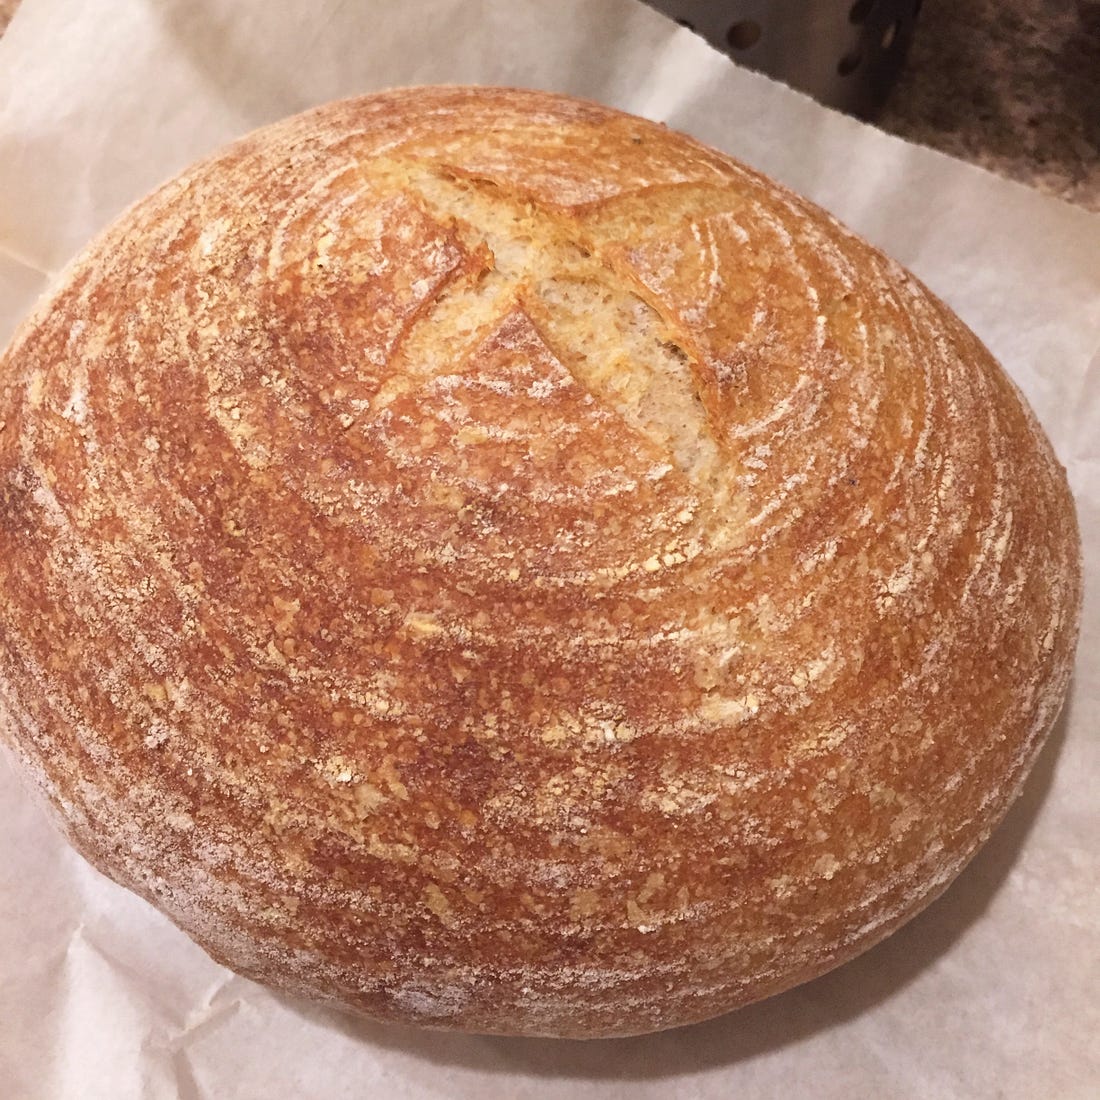 A loaf of whole wheat sourdough, with an X sliced into the top. Concentric circles of flour are visible across the top.